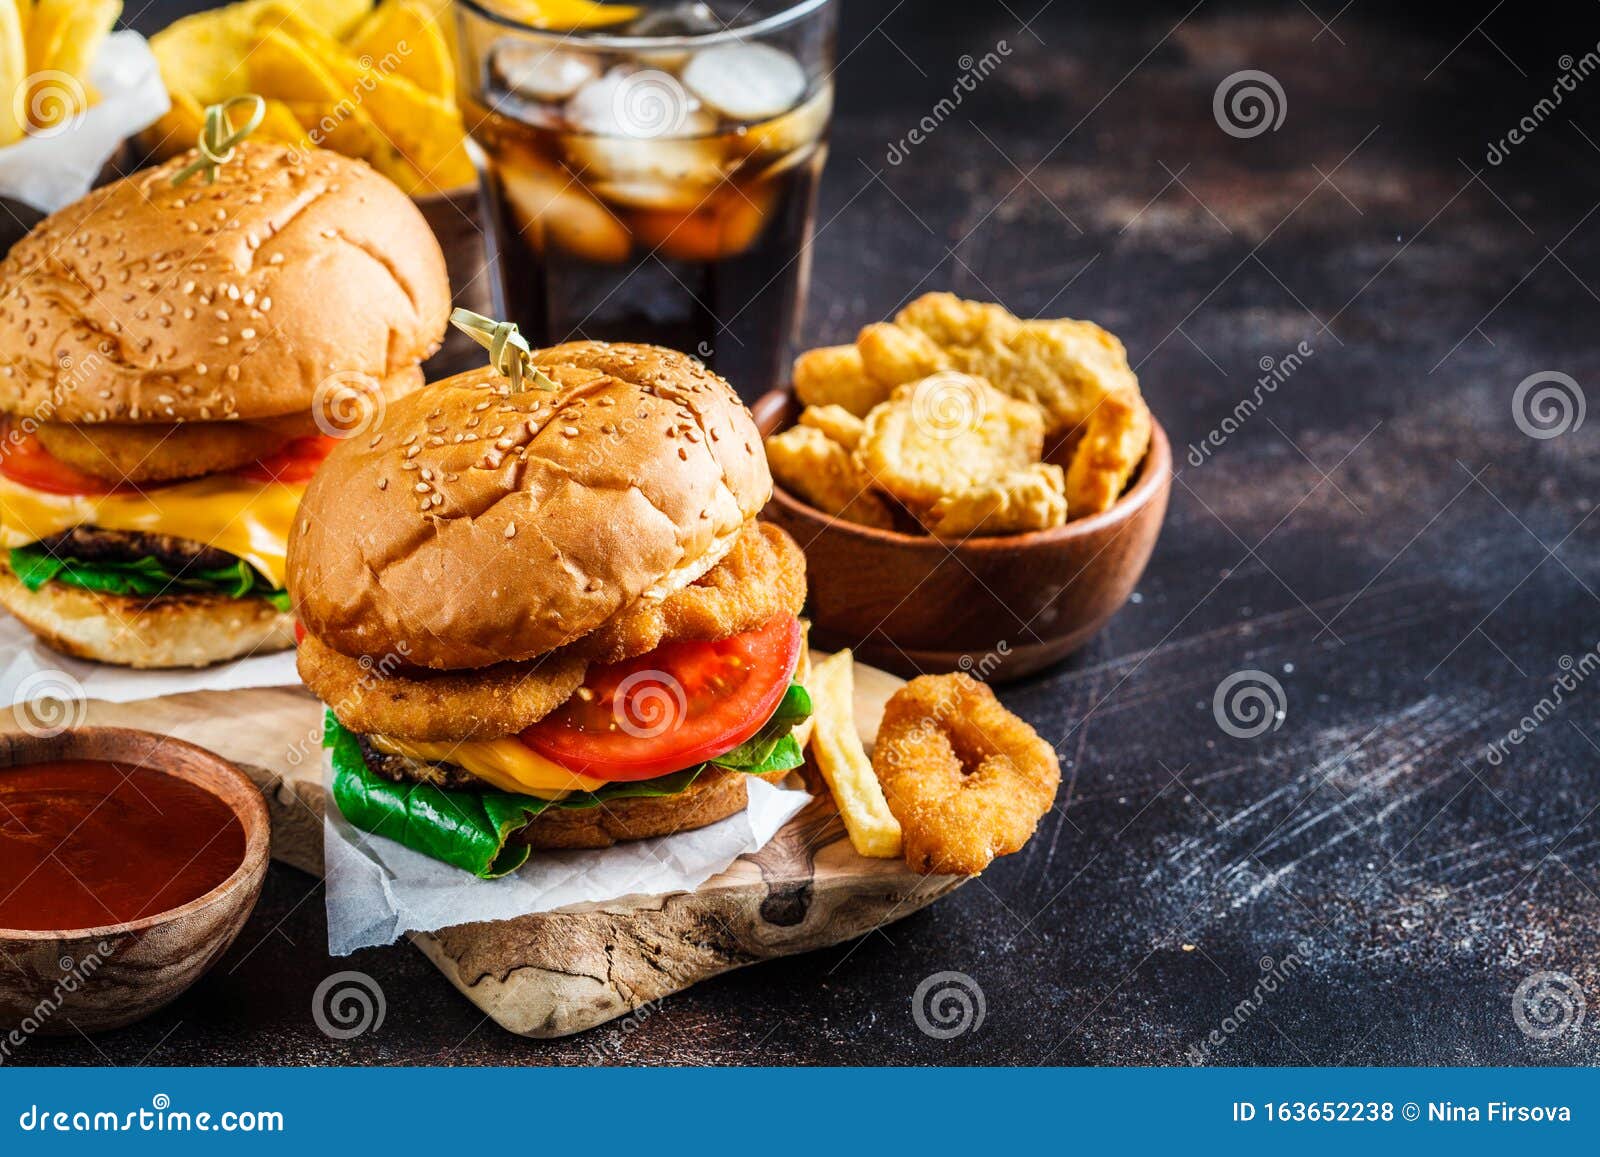 Assortment of Fast Food. Junk Food Background. Cheeseburgers, French Fries,  Nachos, Donuts, Soda and Nuggets on Dark Background Stock Photo - Image of  fast, junk: 163652238